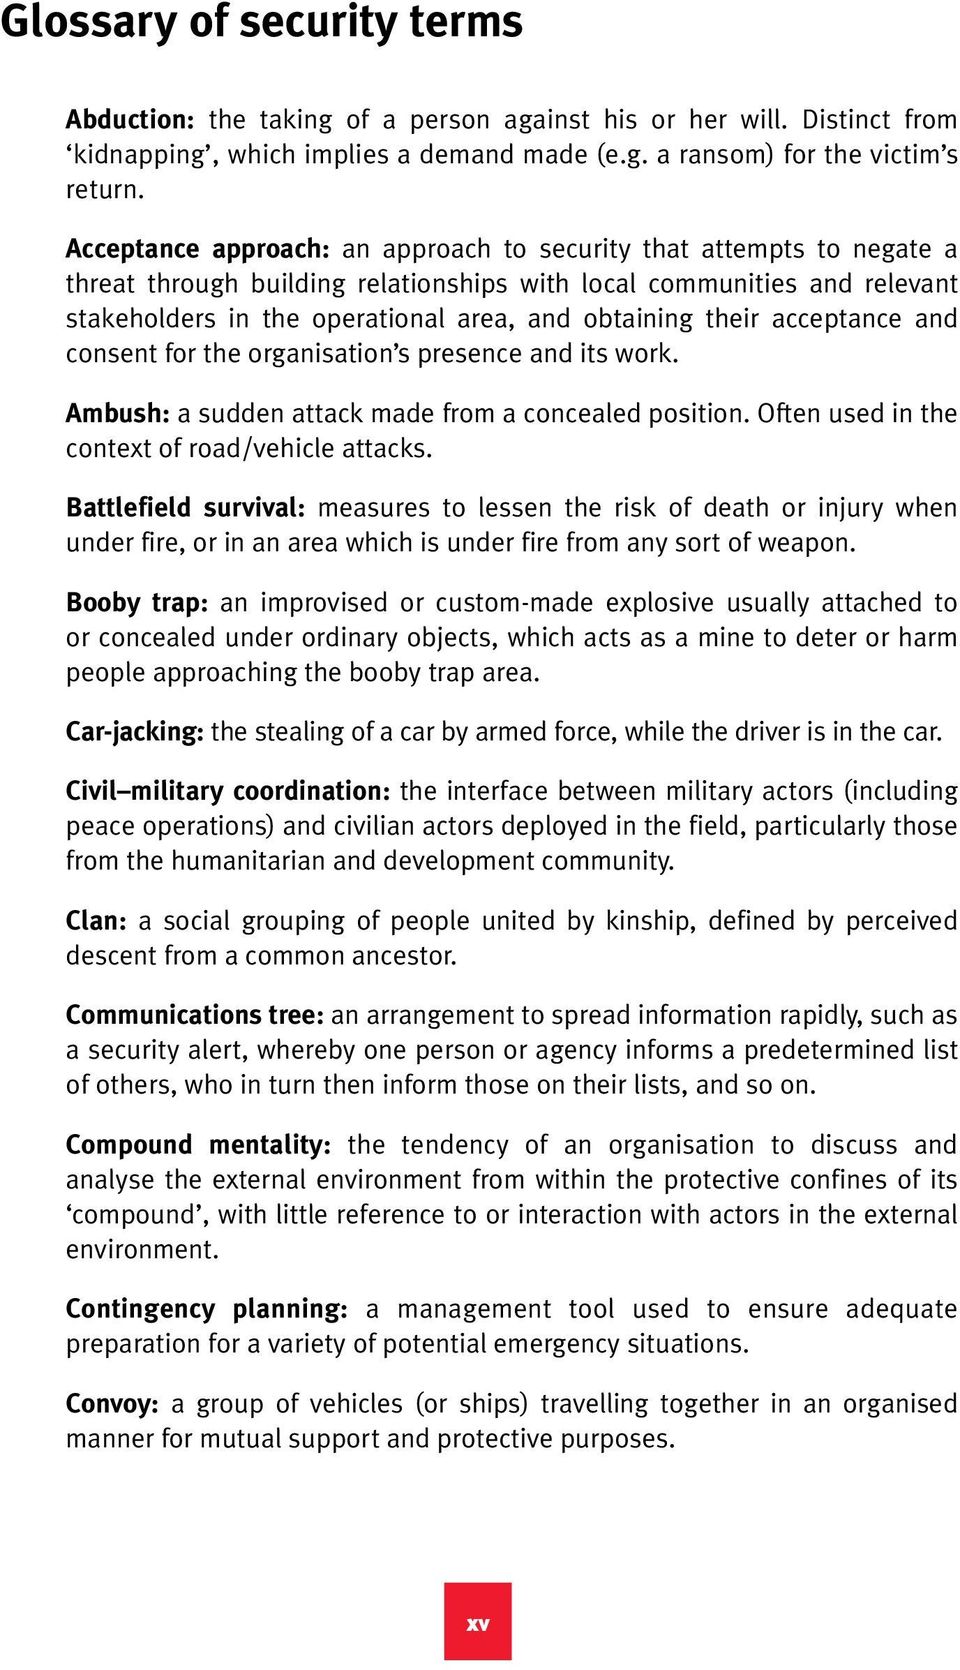 their acceptance and consent for the organisation s presence and its work. Ambush: a sudden attack made from a concealed position. Often used in the context of road/vehicle attacks.